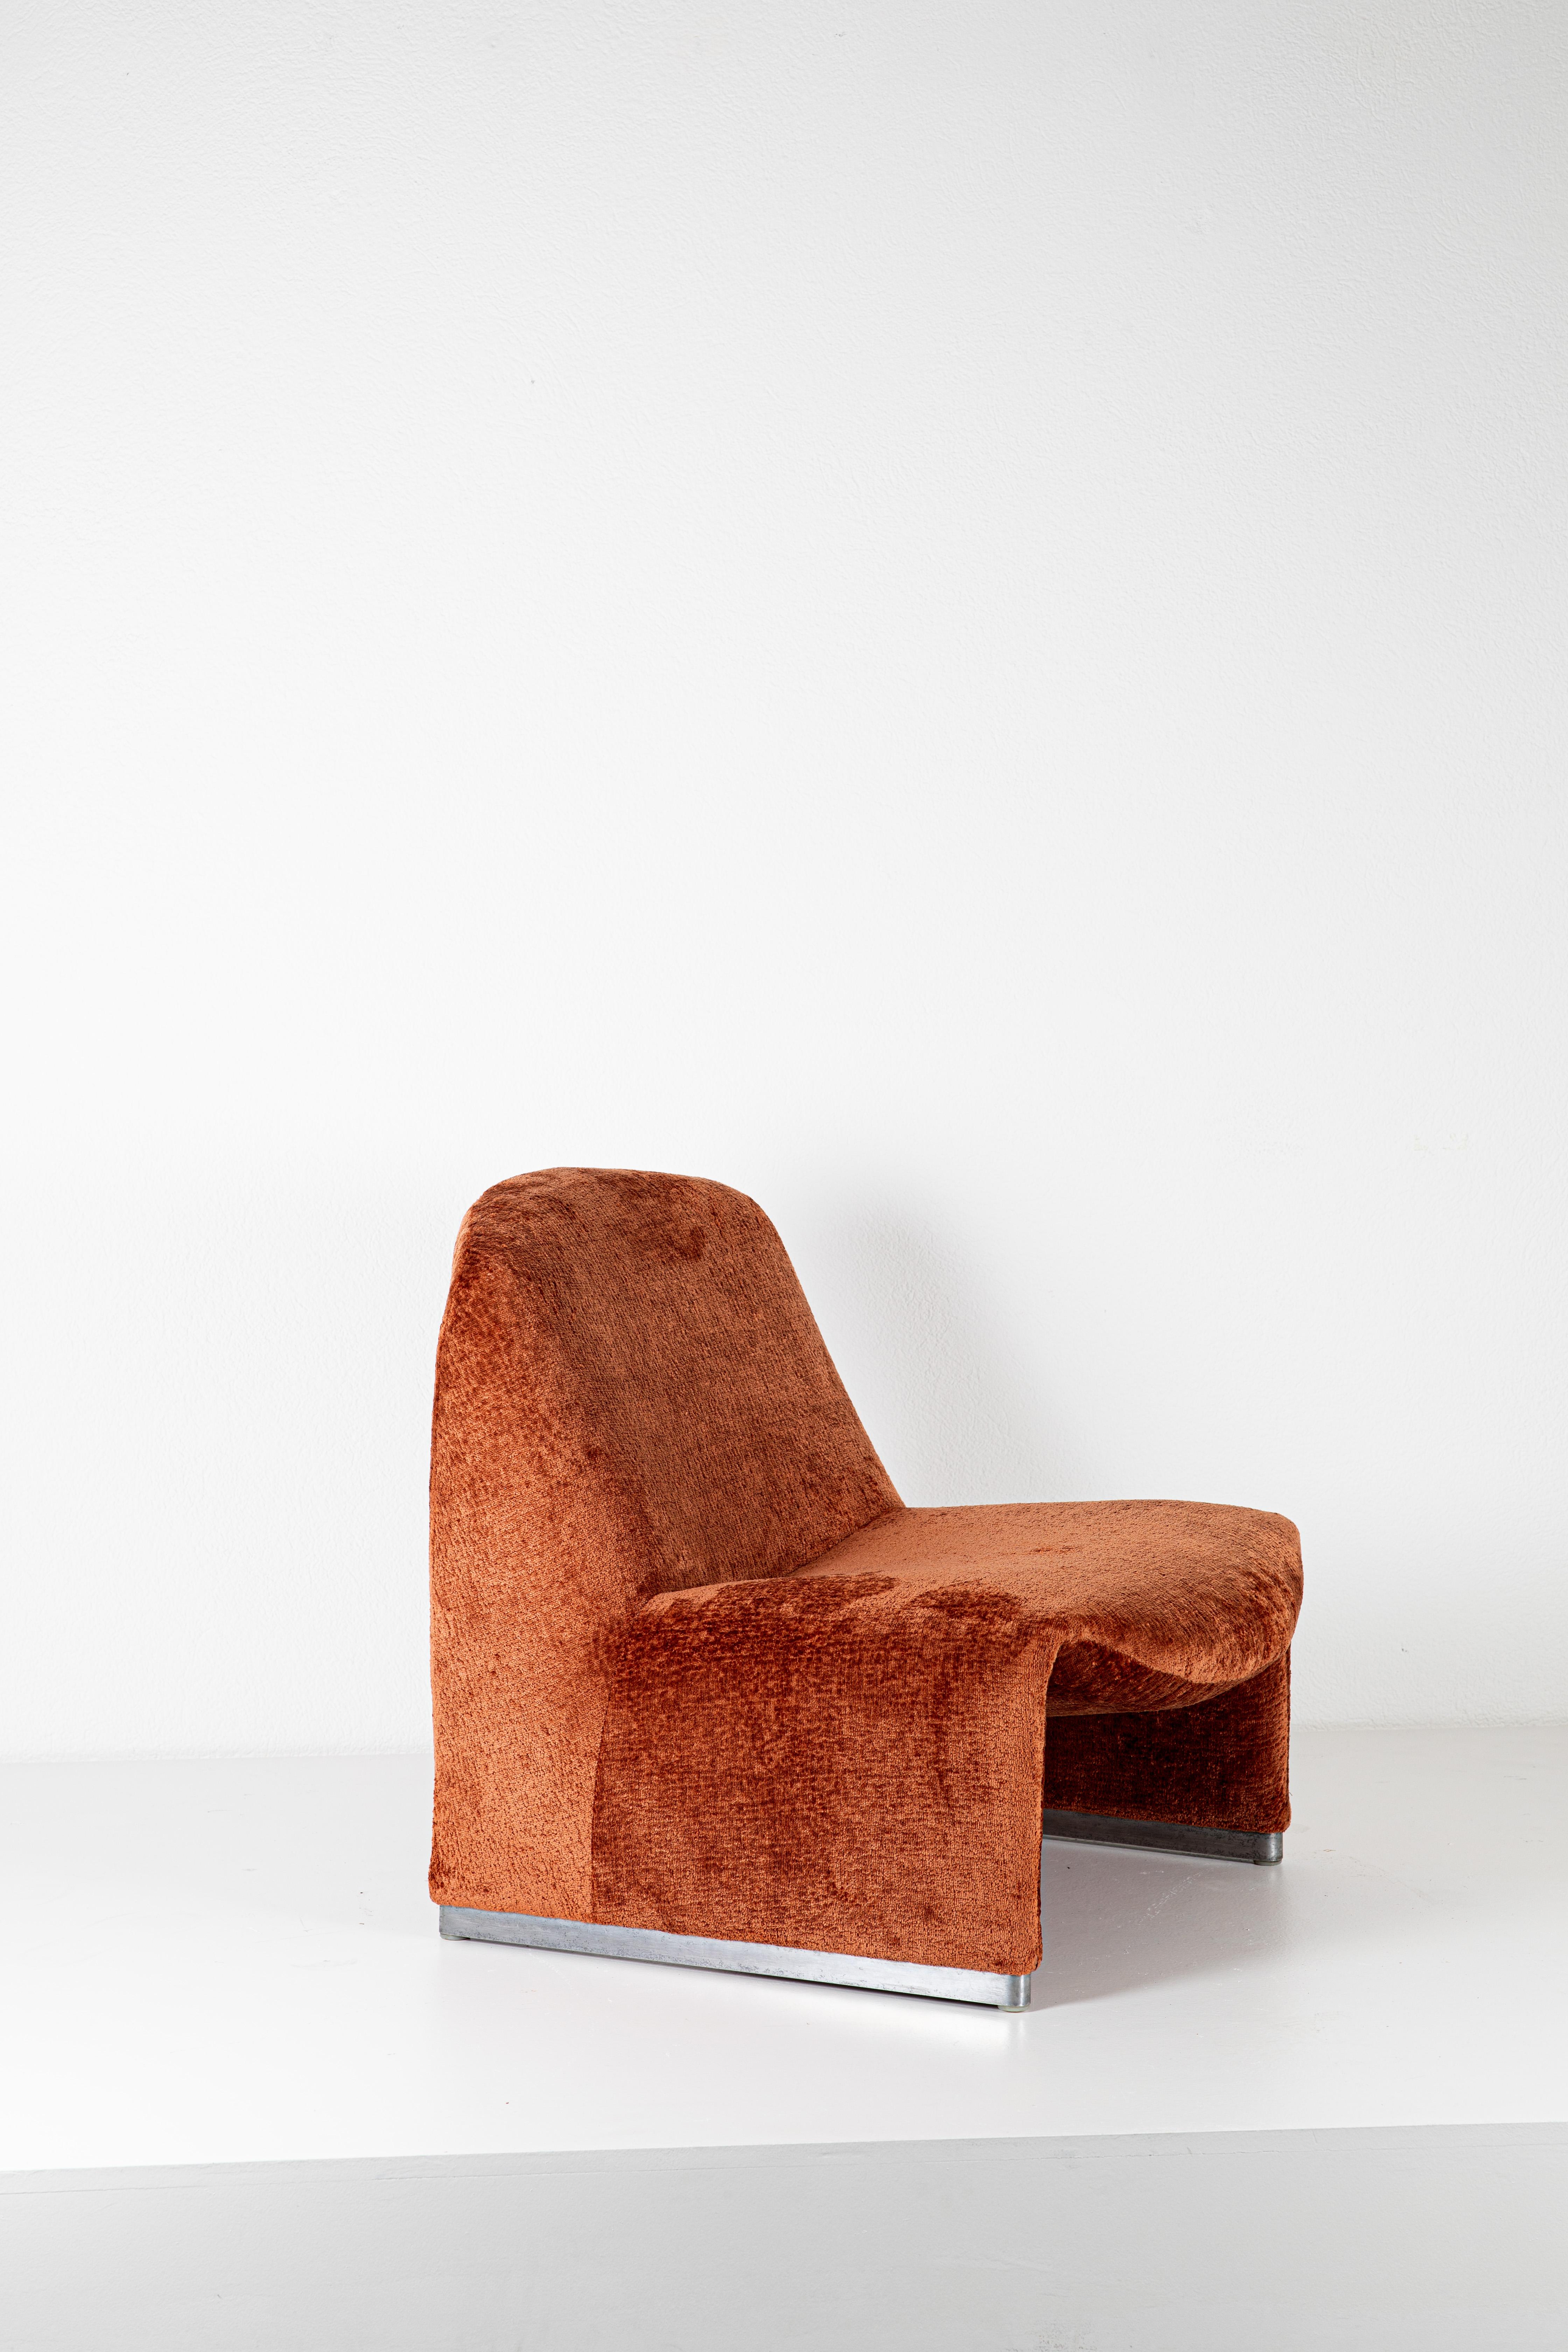 The Alky armchair is a design by Giancarlo Piretti, an Italian industrial designer known for his innovative and functional furniture designs. The Alky chair is one of his notable creations and is recognized for its distinctive form and ergonomic